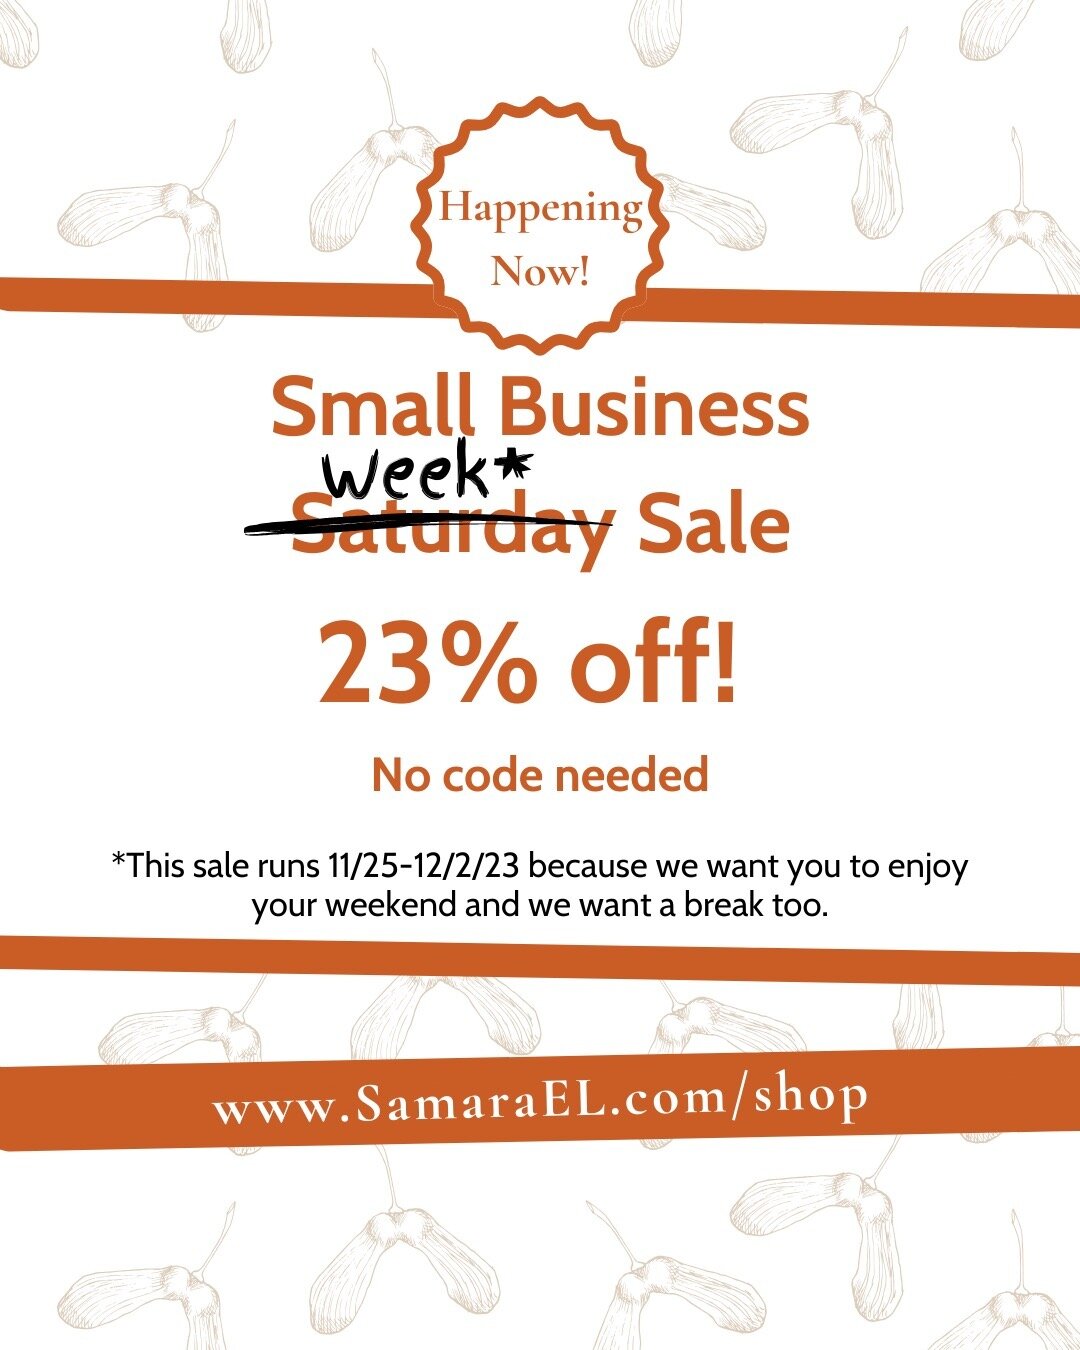 We wanted to celebrate Small Business Saturday and all you do for young children, but wanted you to enjoy your weekend. So&白马王子;

We made it a Small Business WEEK Sale by offering you a 23% discount off everything in the Samara Shop now through Dec